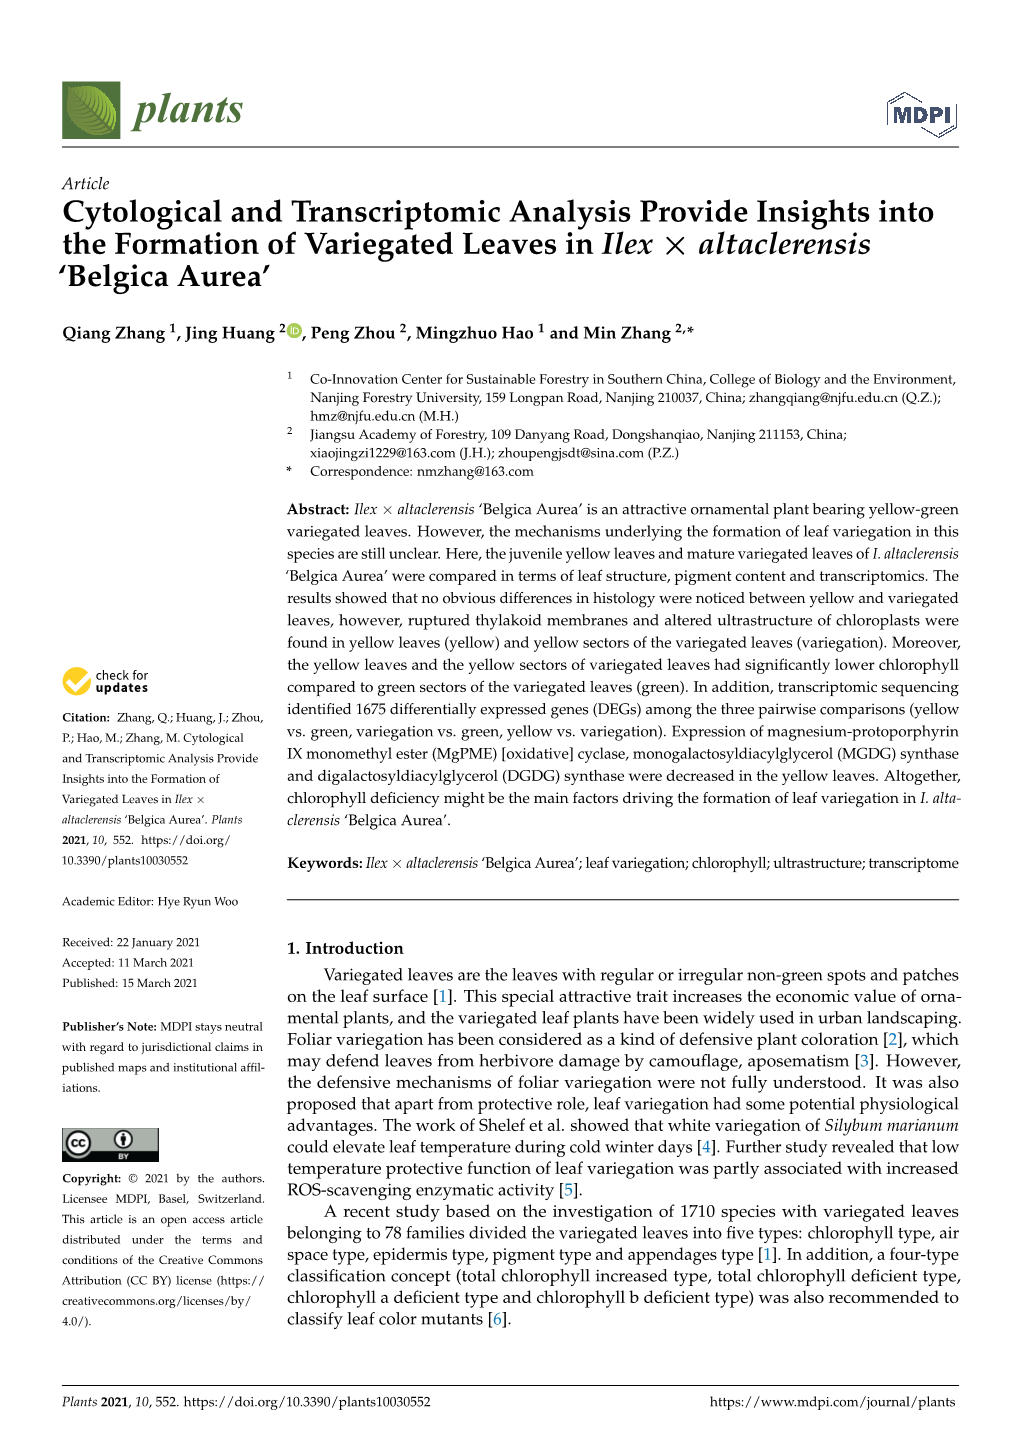 Cytological and Transcriptomic Analysis Provide Insights Into the Formation of Variegated Leaves in Ilex × Altaclerensis ‘Belgica Aurea’